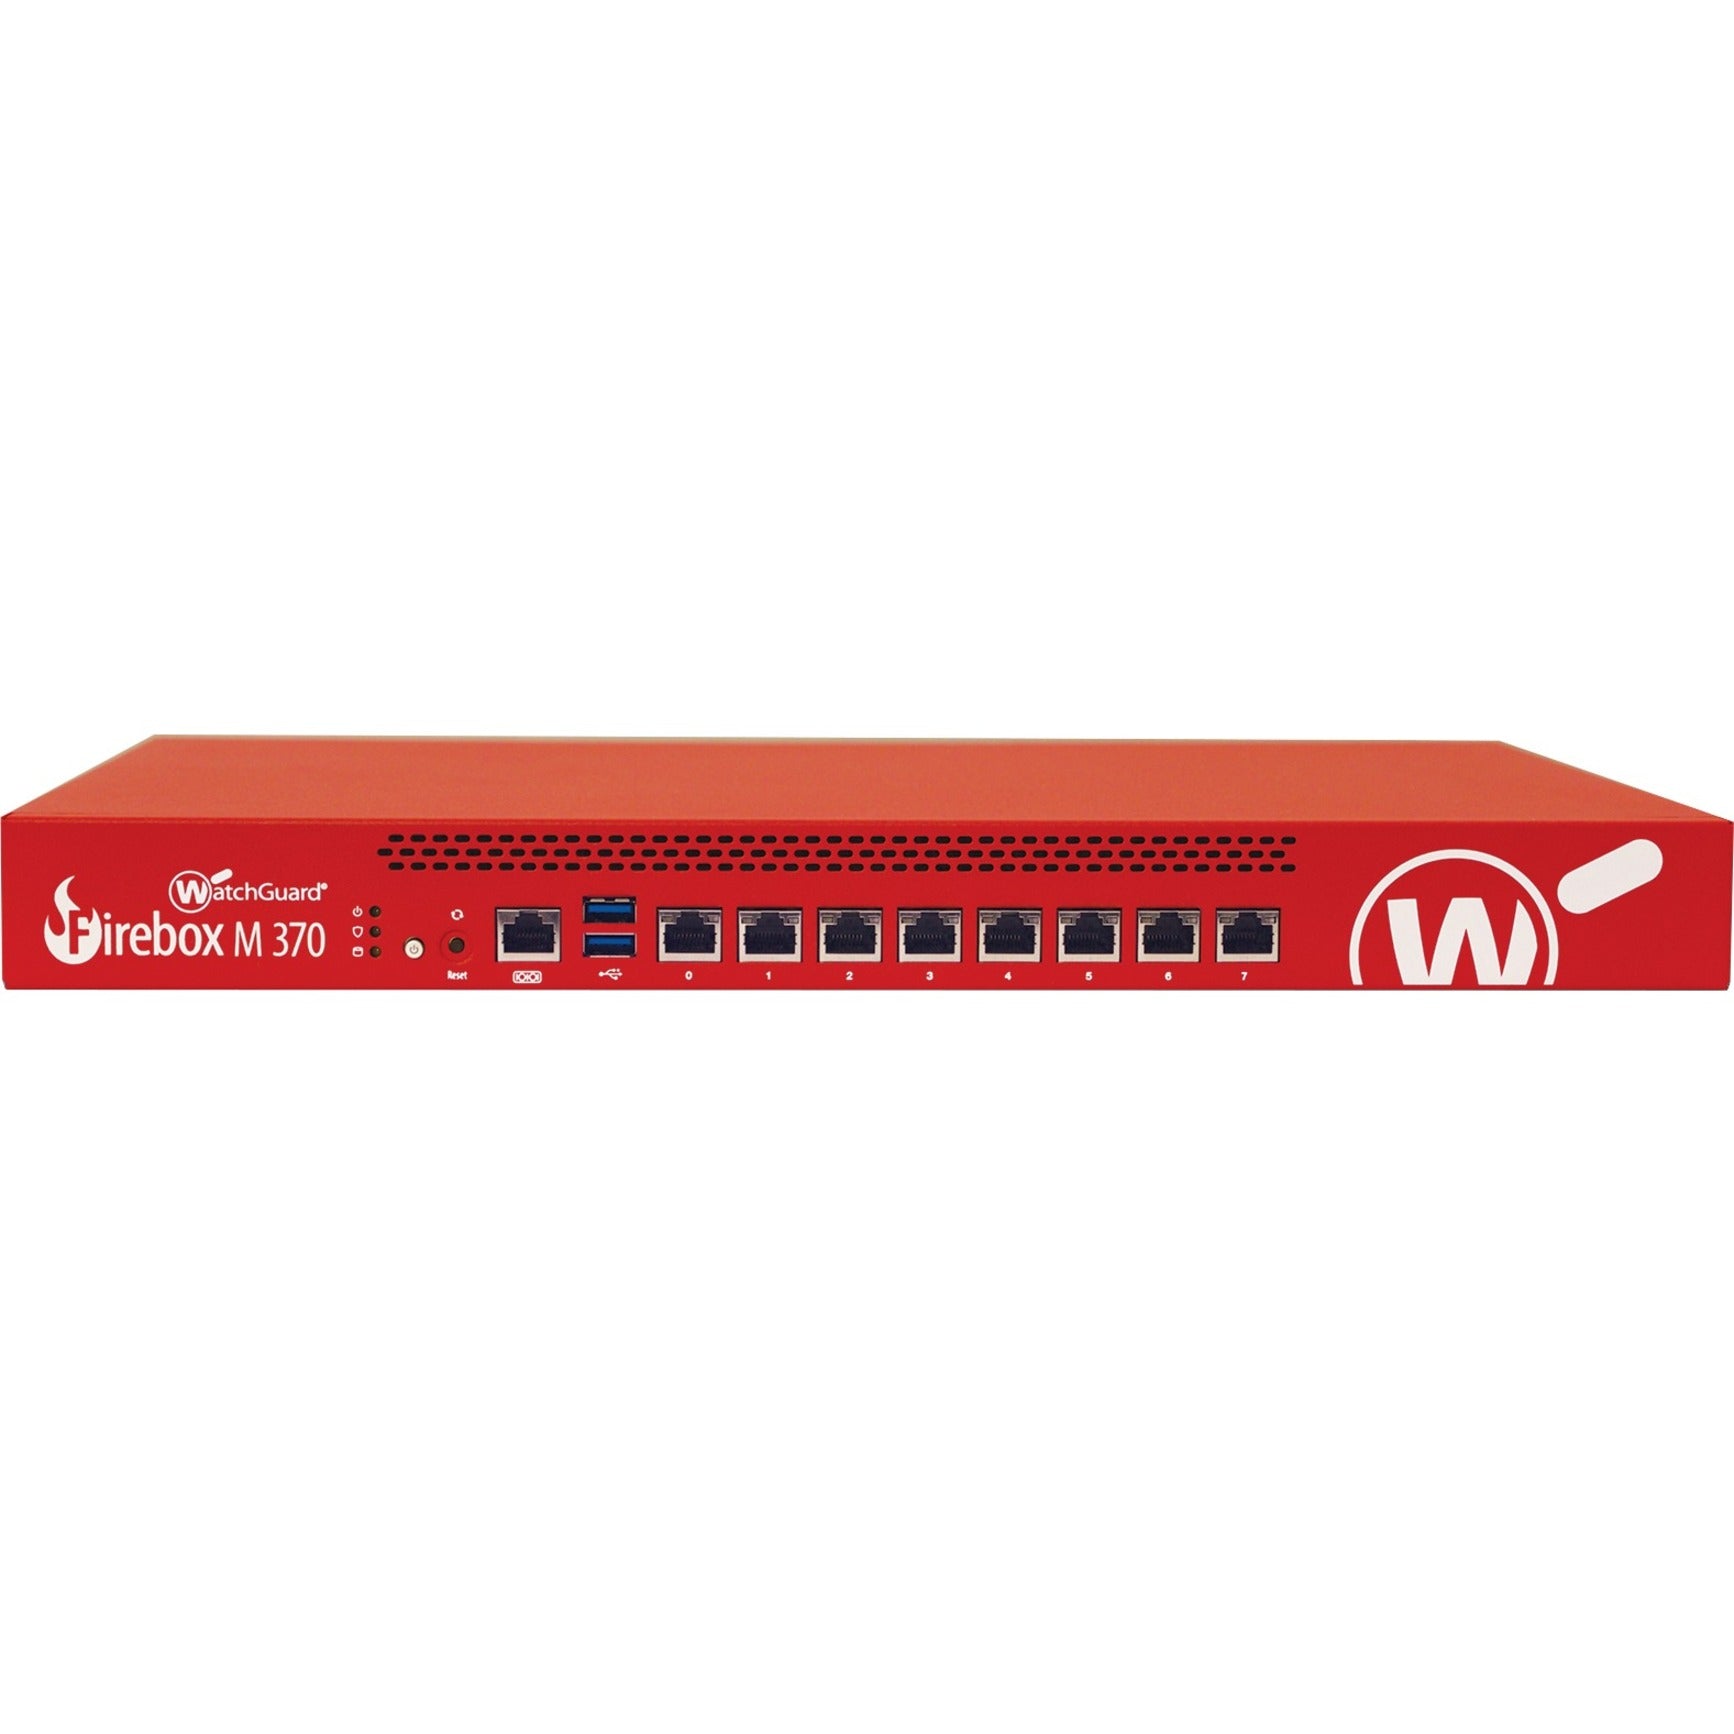 WatchGuard WGM37641 Firebox M370 Network Security/Firewall Appliance, 1-yr Total Security Suite